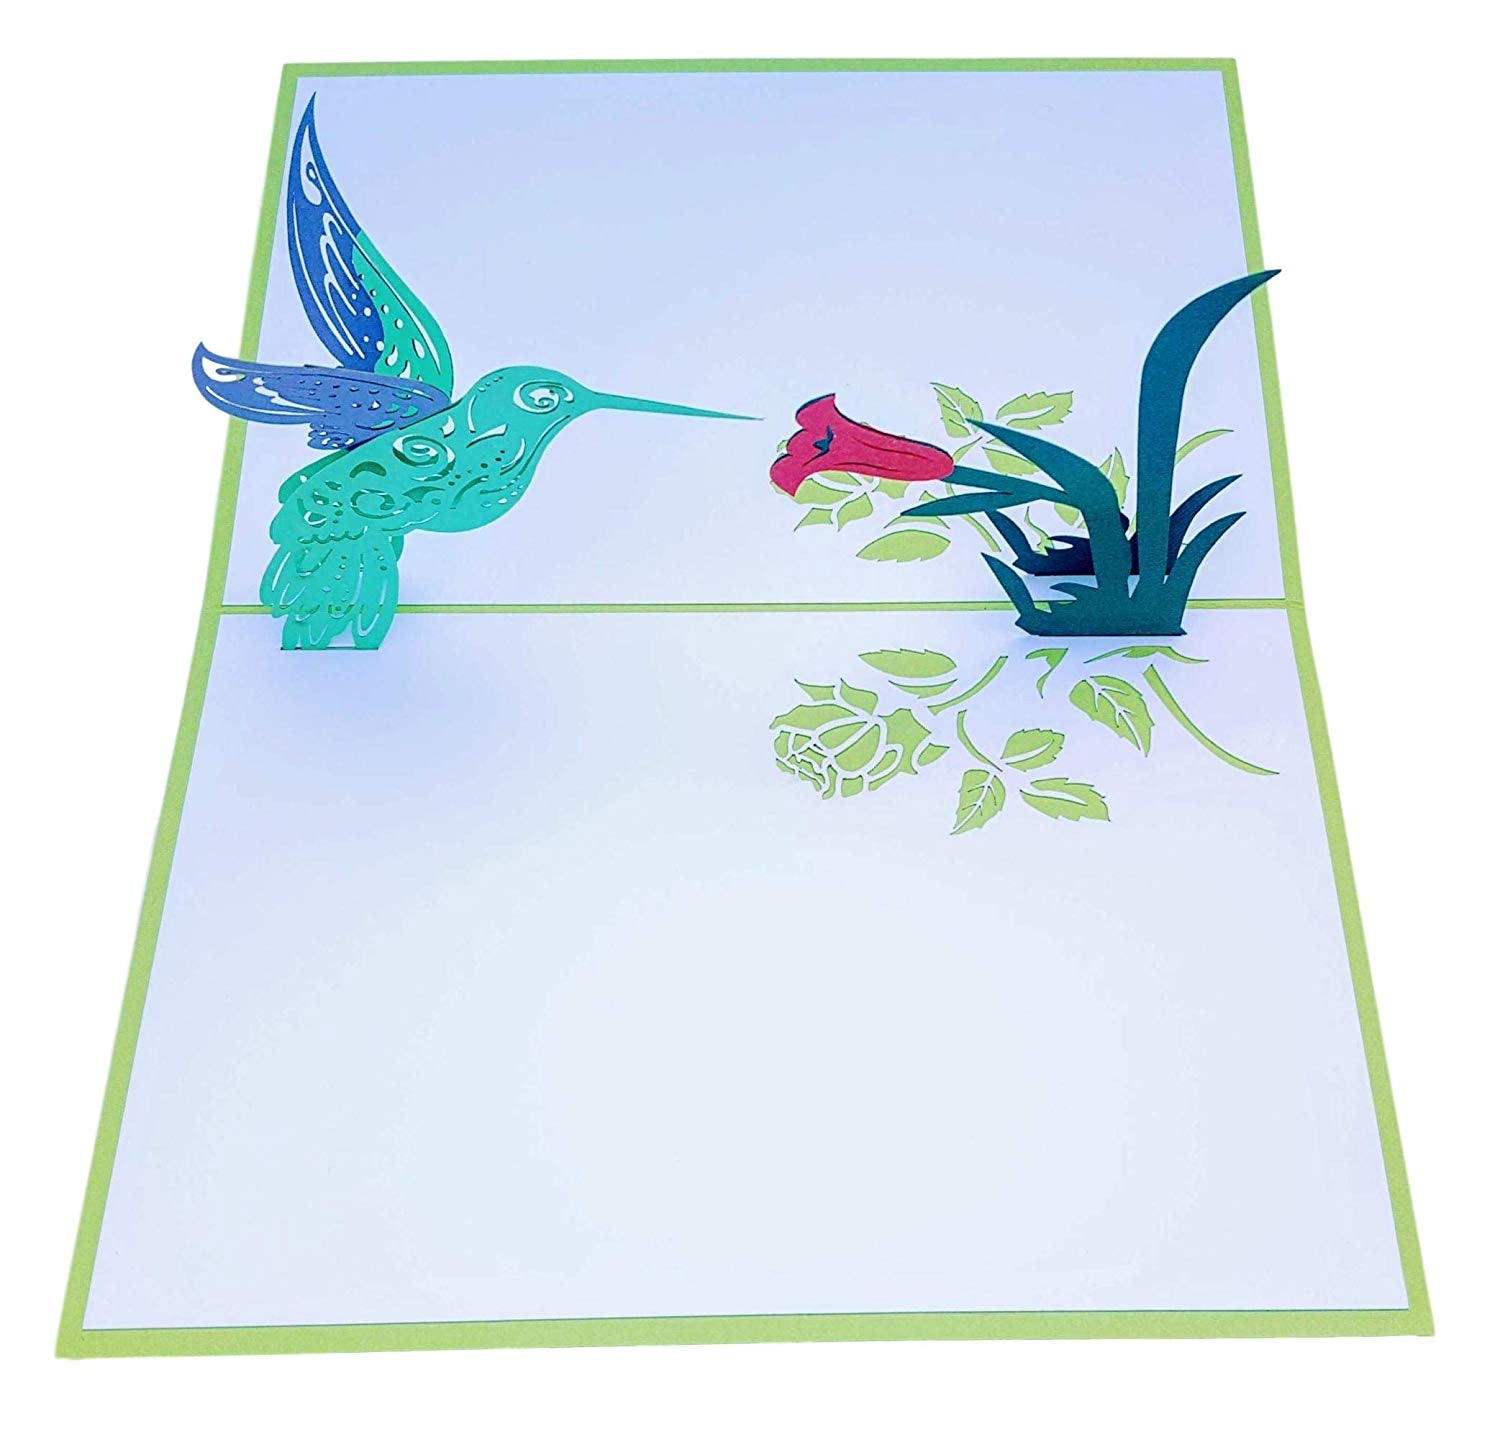 Hummingbird 3D Pop Up Greeting Card - Admin Assistant Day - Birthday - Get Well - Love - Thinking Of - iGifts And Cards